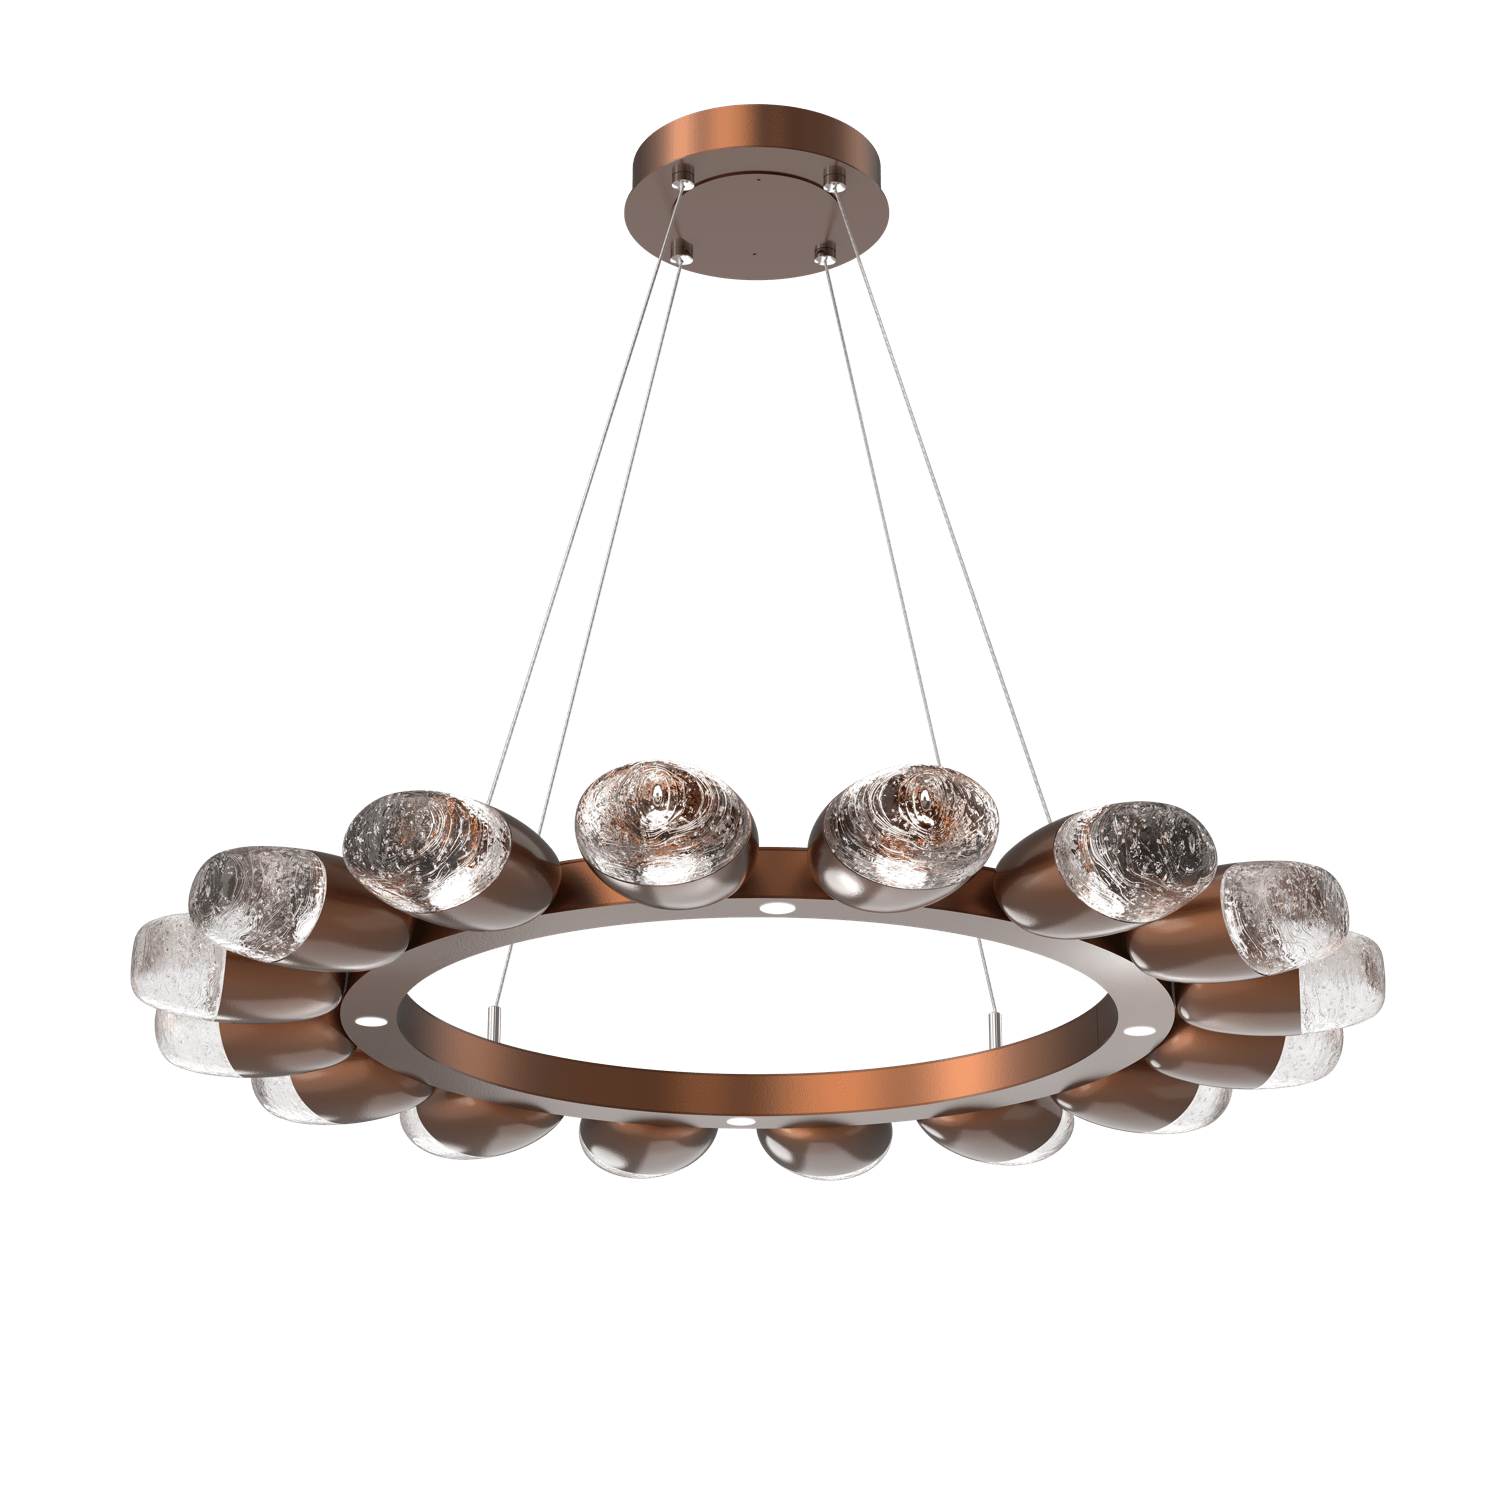 CHB0079-36-BB-Hammerton-Studio-Pebble-36-inch-radial-ring-chandelier-with-burnished-bronze-finish-and-clear-cast-glass-shades-and-LED-lamping